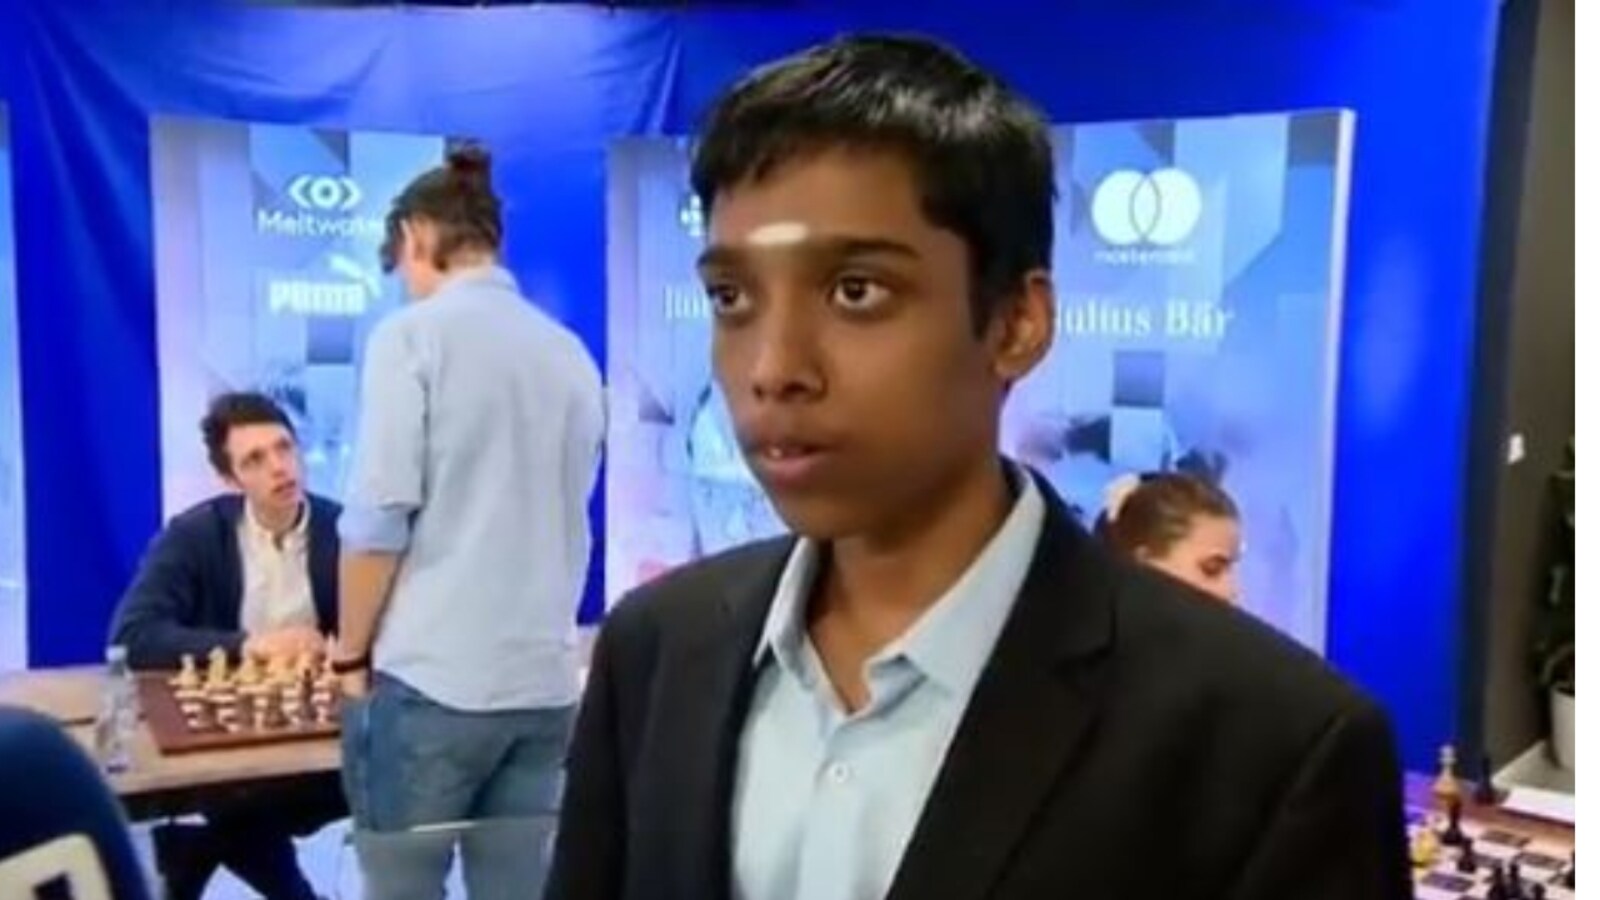 World Cup chess: Gukesh, Gujrathi bow out; Praggnanandhaa forces tie-breaker  - Rediff.com